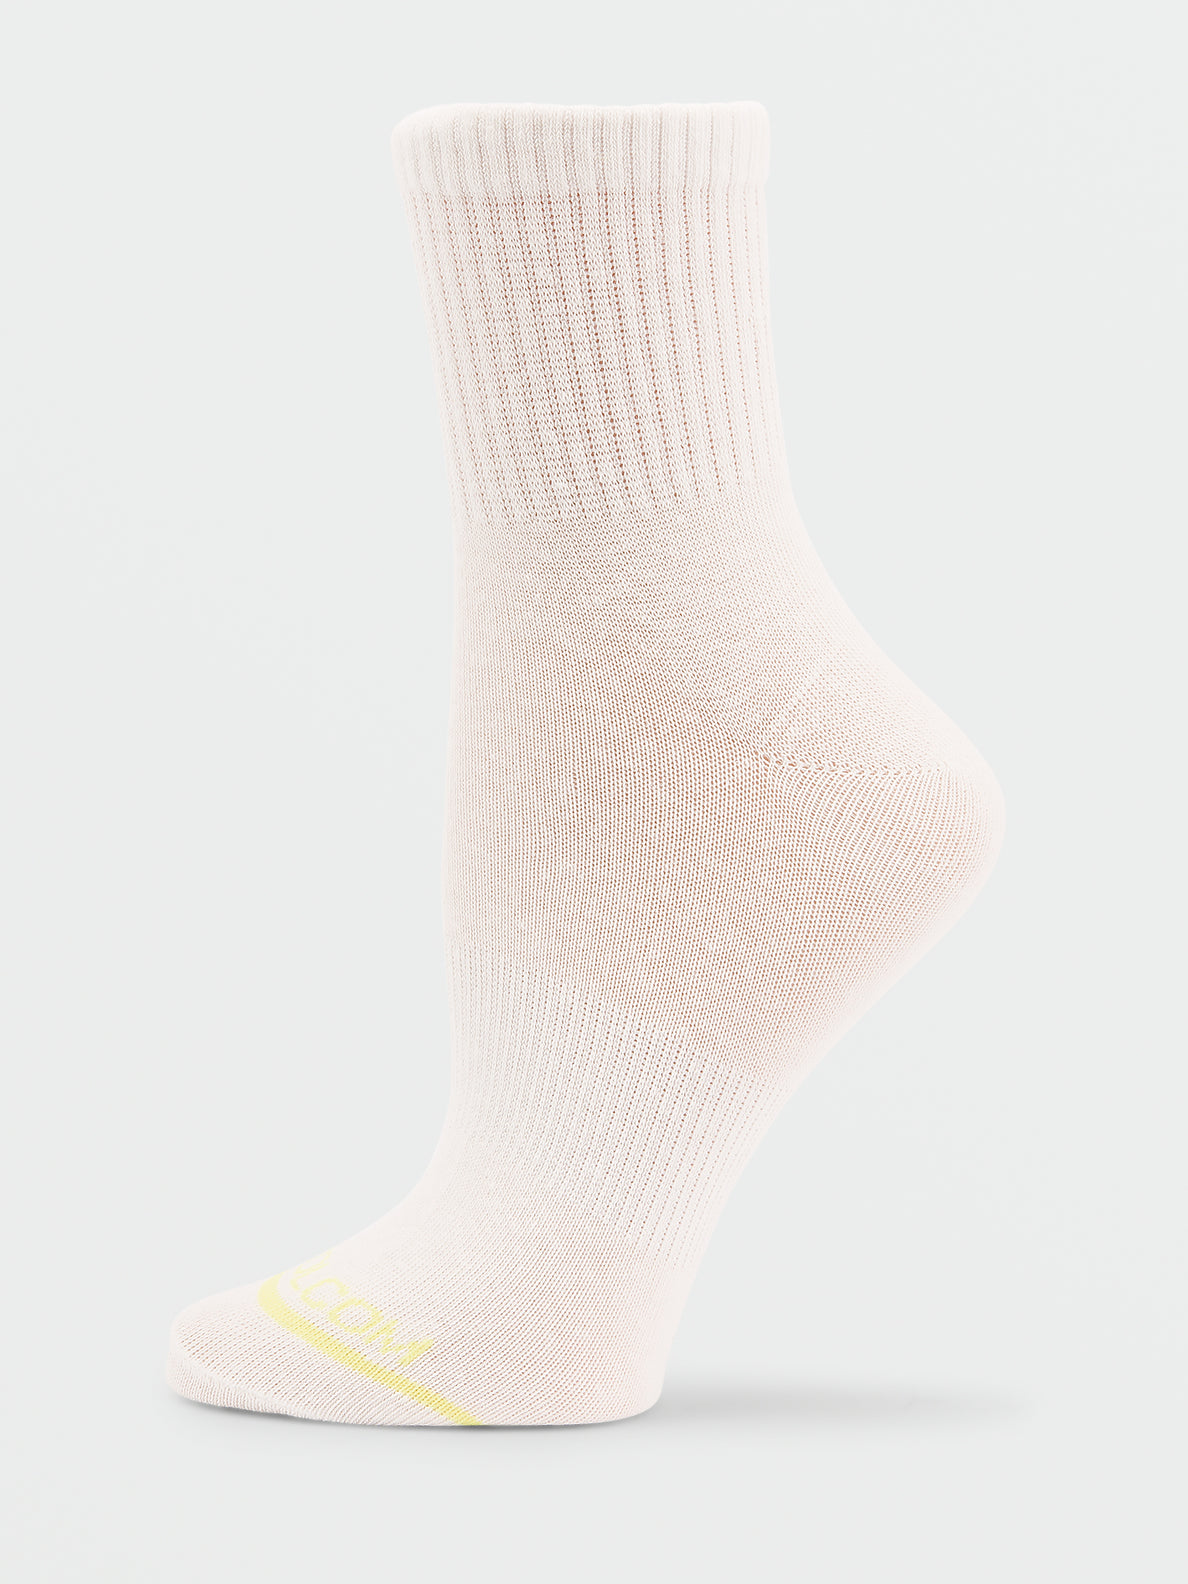 The New Crew Socks 3 Pack - Assorted Colors (E6332200_AST) [5]